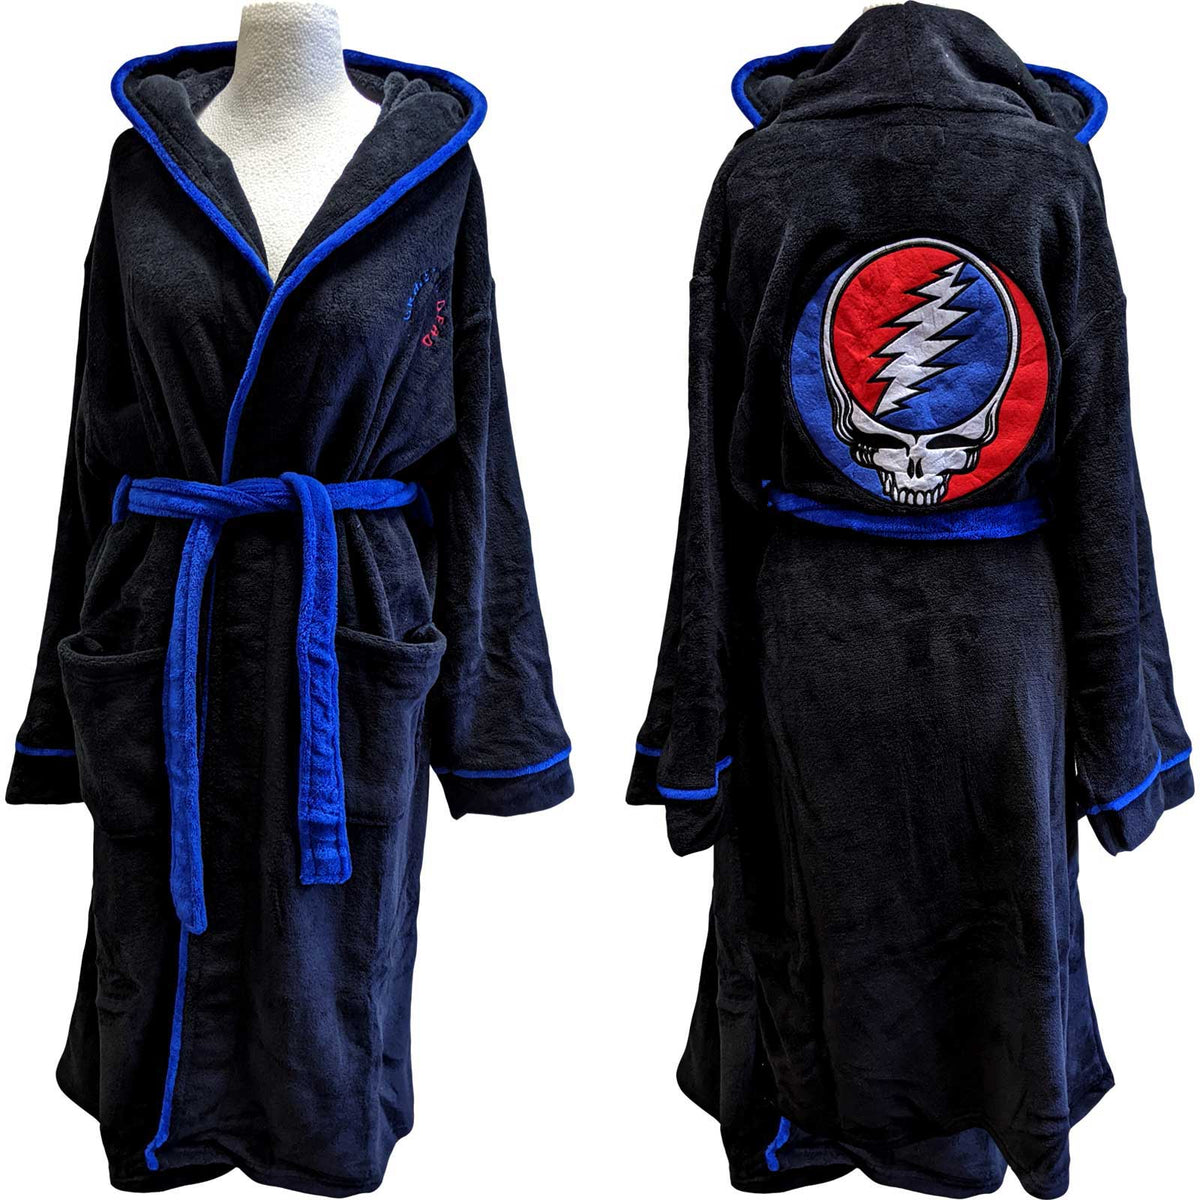 The Grateful Dead Unisex Bathrobe - Steal Your Face - Official Licensed Music Design